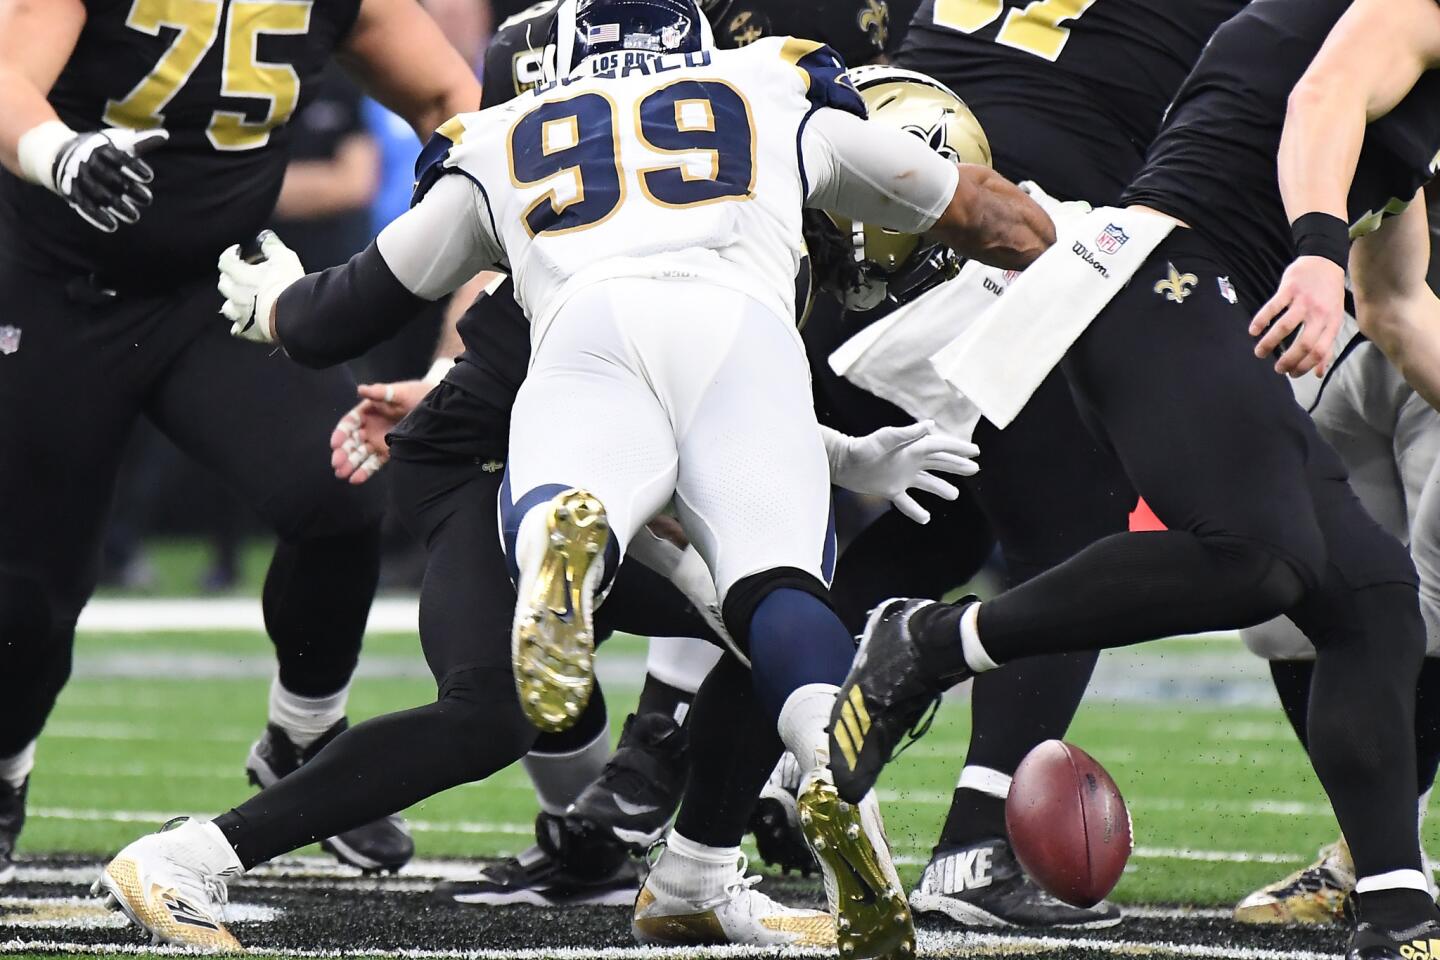 Rams defensive end Aaron Donald strips the ball of New Orleans Saints running back Alvin Kamara in the third quarter in the NFC Championship at the Superdome in New Orleans Sunday. Kamara recovered the ball.